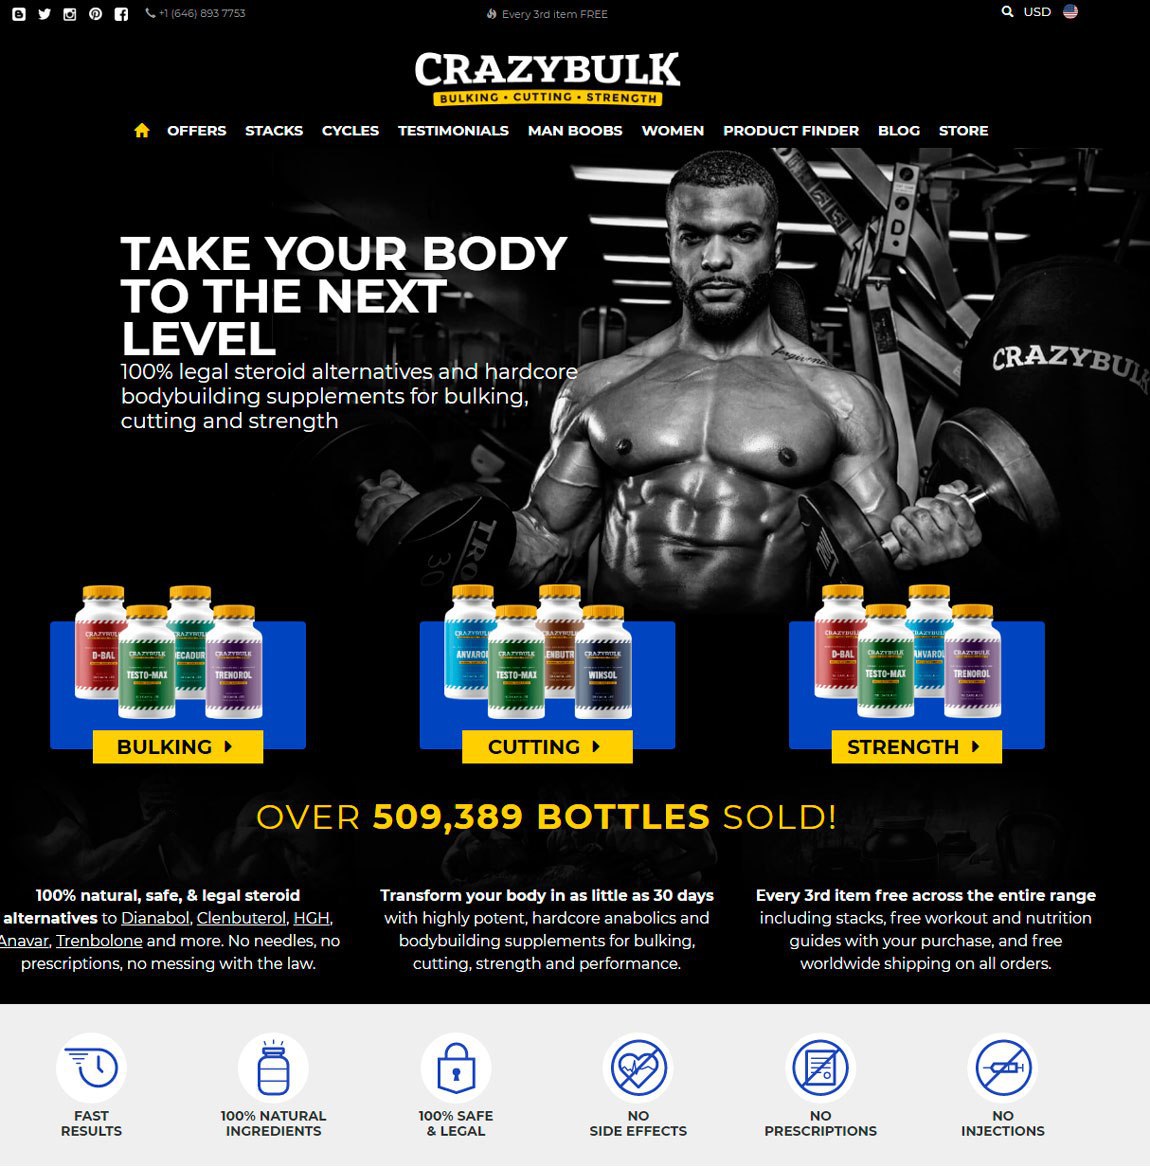 3cc research labs clenbuterol